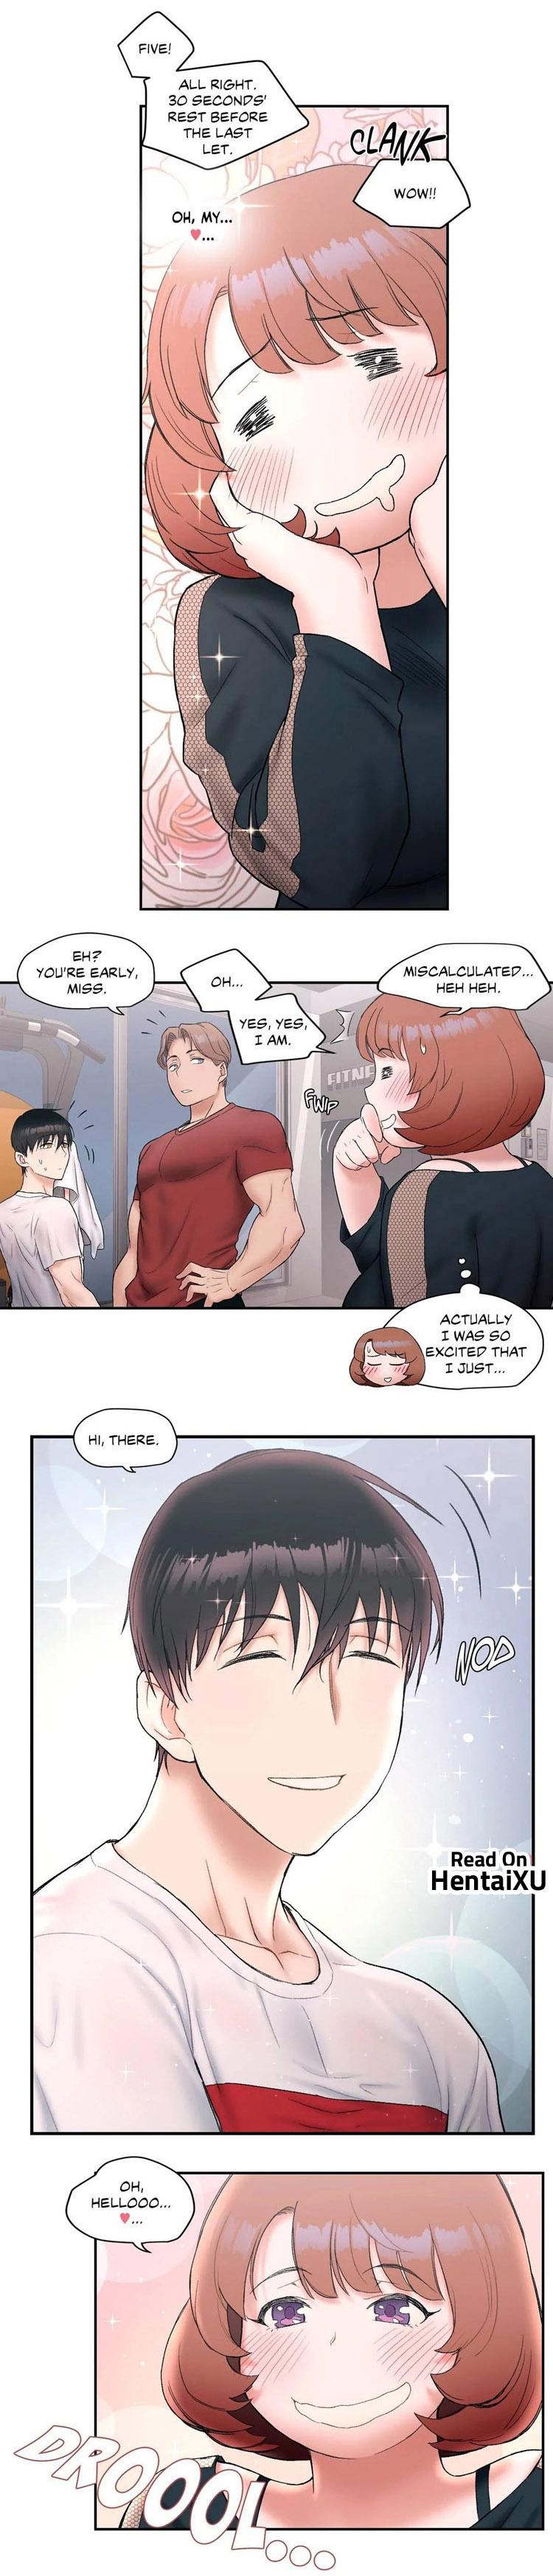 Sexercise Ch.9/? 137